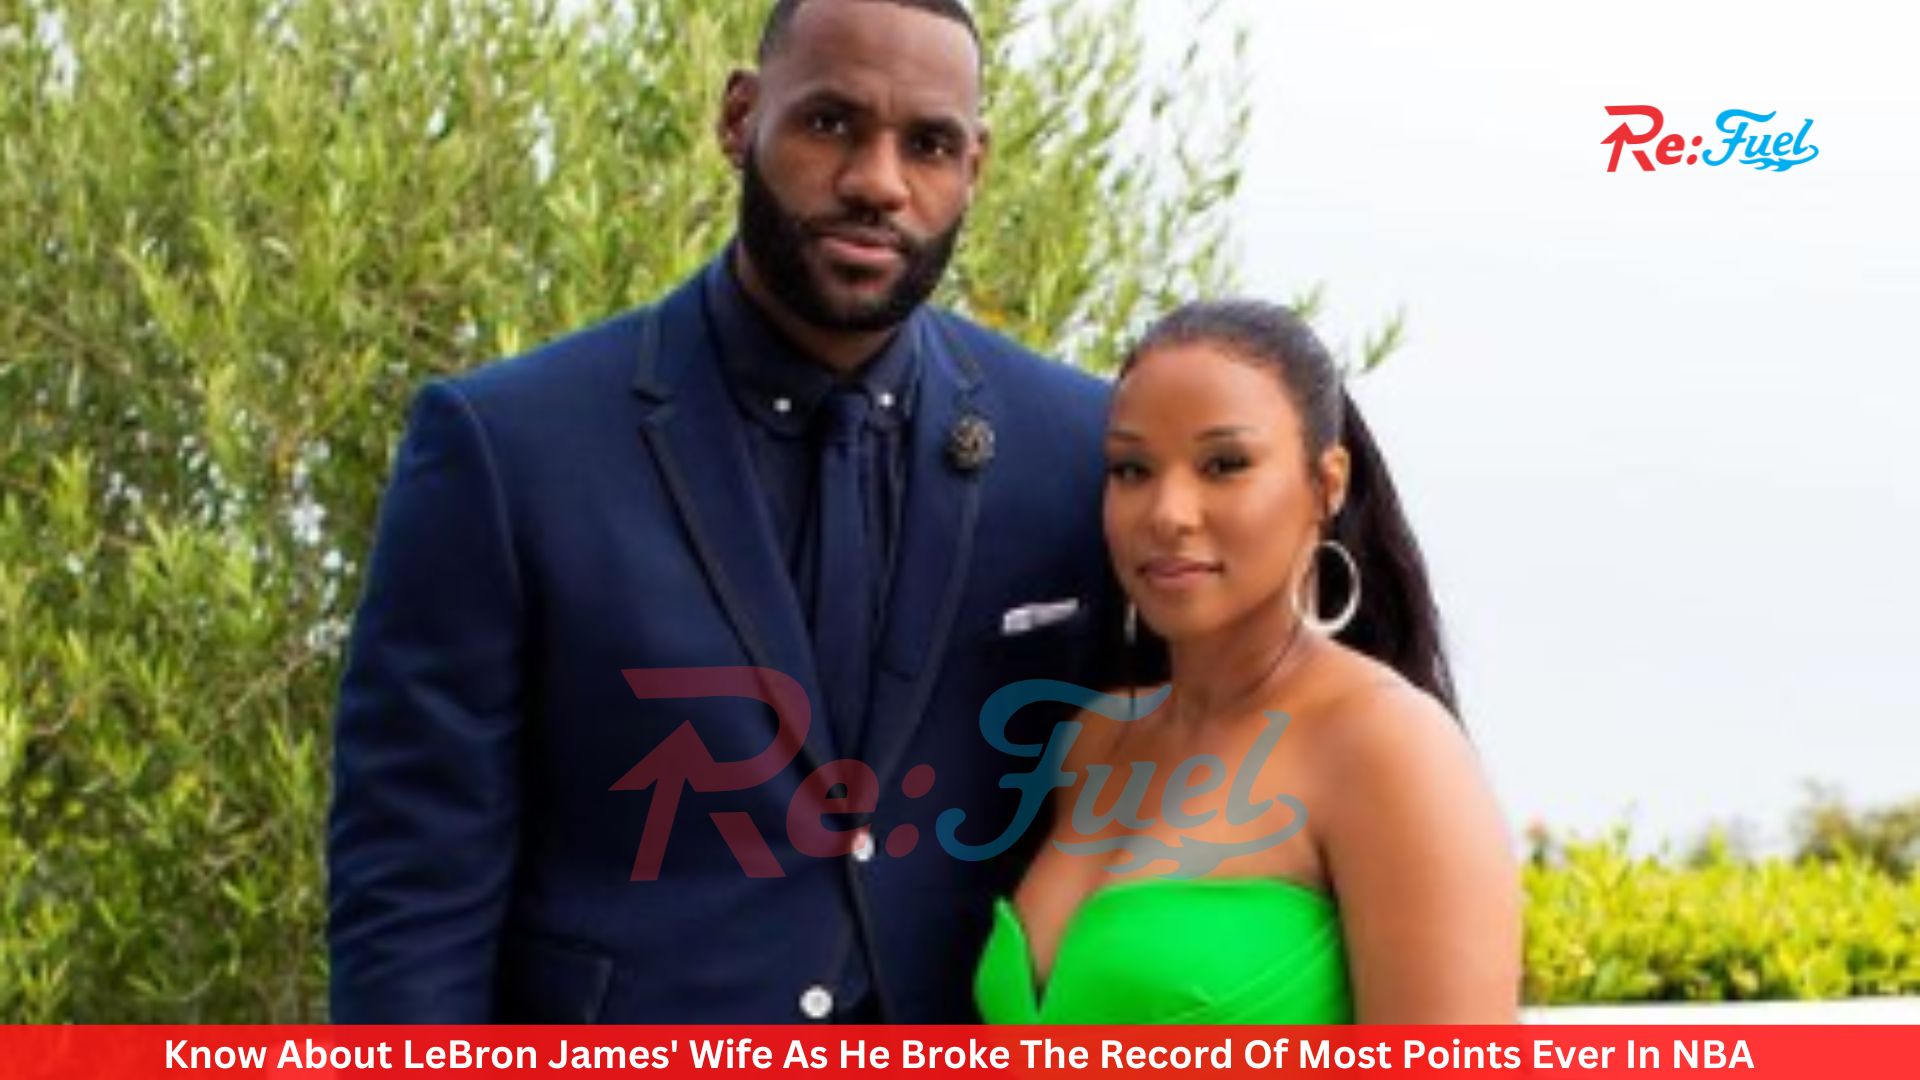 Know About LeBron James' Wife As He Broke The Record Of Most Points Ever In NBA